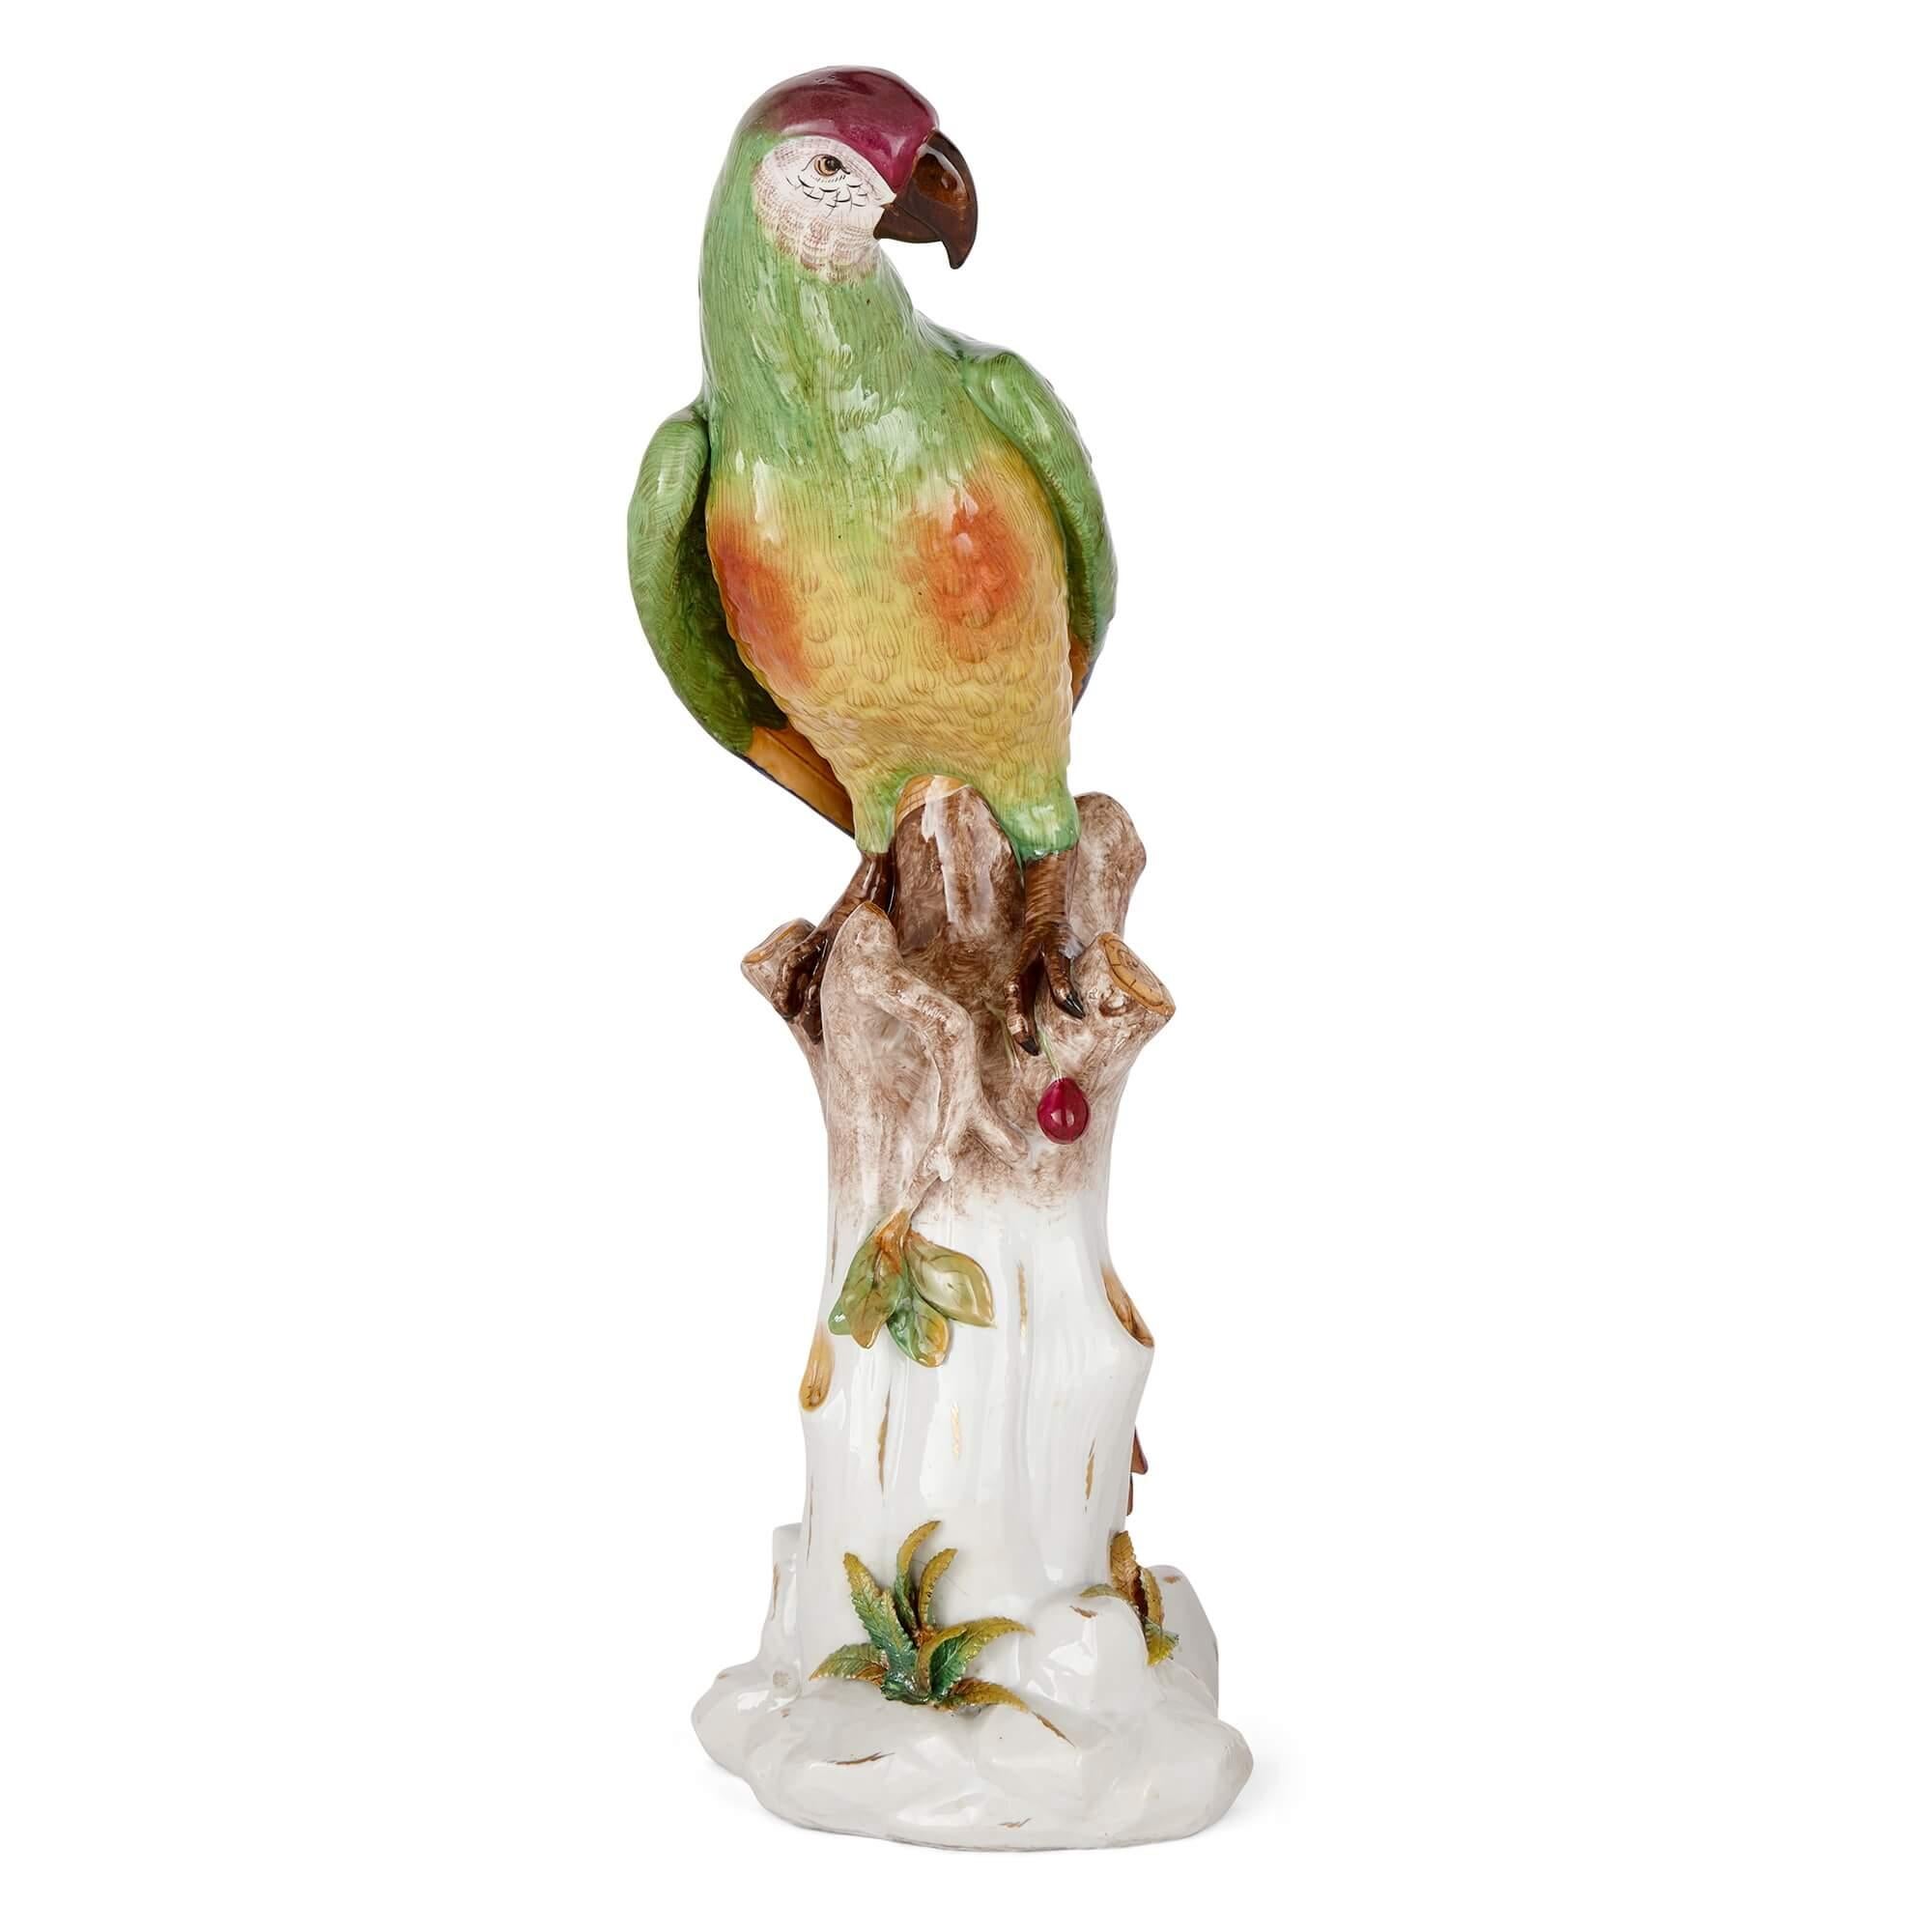 A very large Volkstedt porcelain sculpture of a parrot
German, early 20th century
Measures: Height 50cm, width 18cm, depth 23cm.

Full of vitality and character, this fine and very large porcelain parrot sculpture was made by the German makers